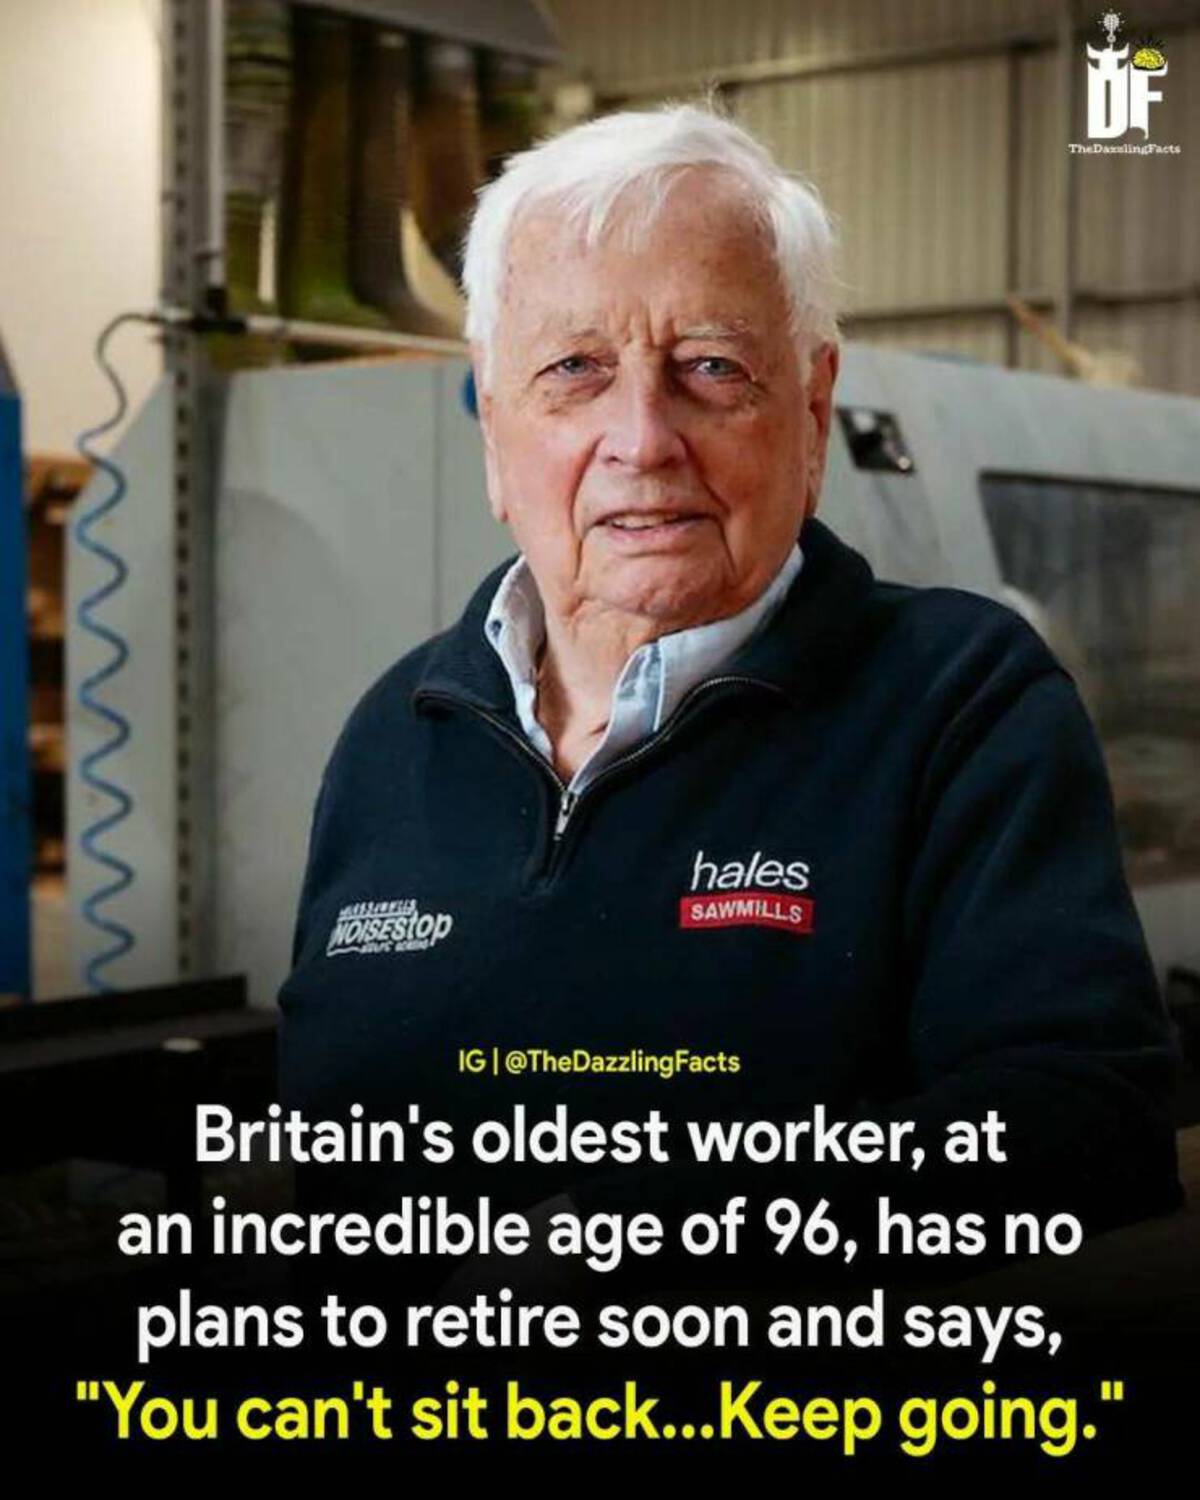 photo caption - Maissileres Noisestop Us O hales Sawmills Of TheDaxelingFacts Ig | Britain's oldest worker, at an incredible age of 96, has no plans to retire soon and says, "You can't sit back...Keep going."